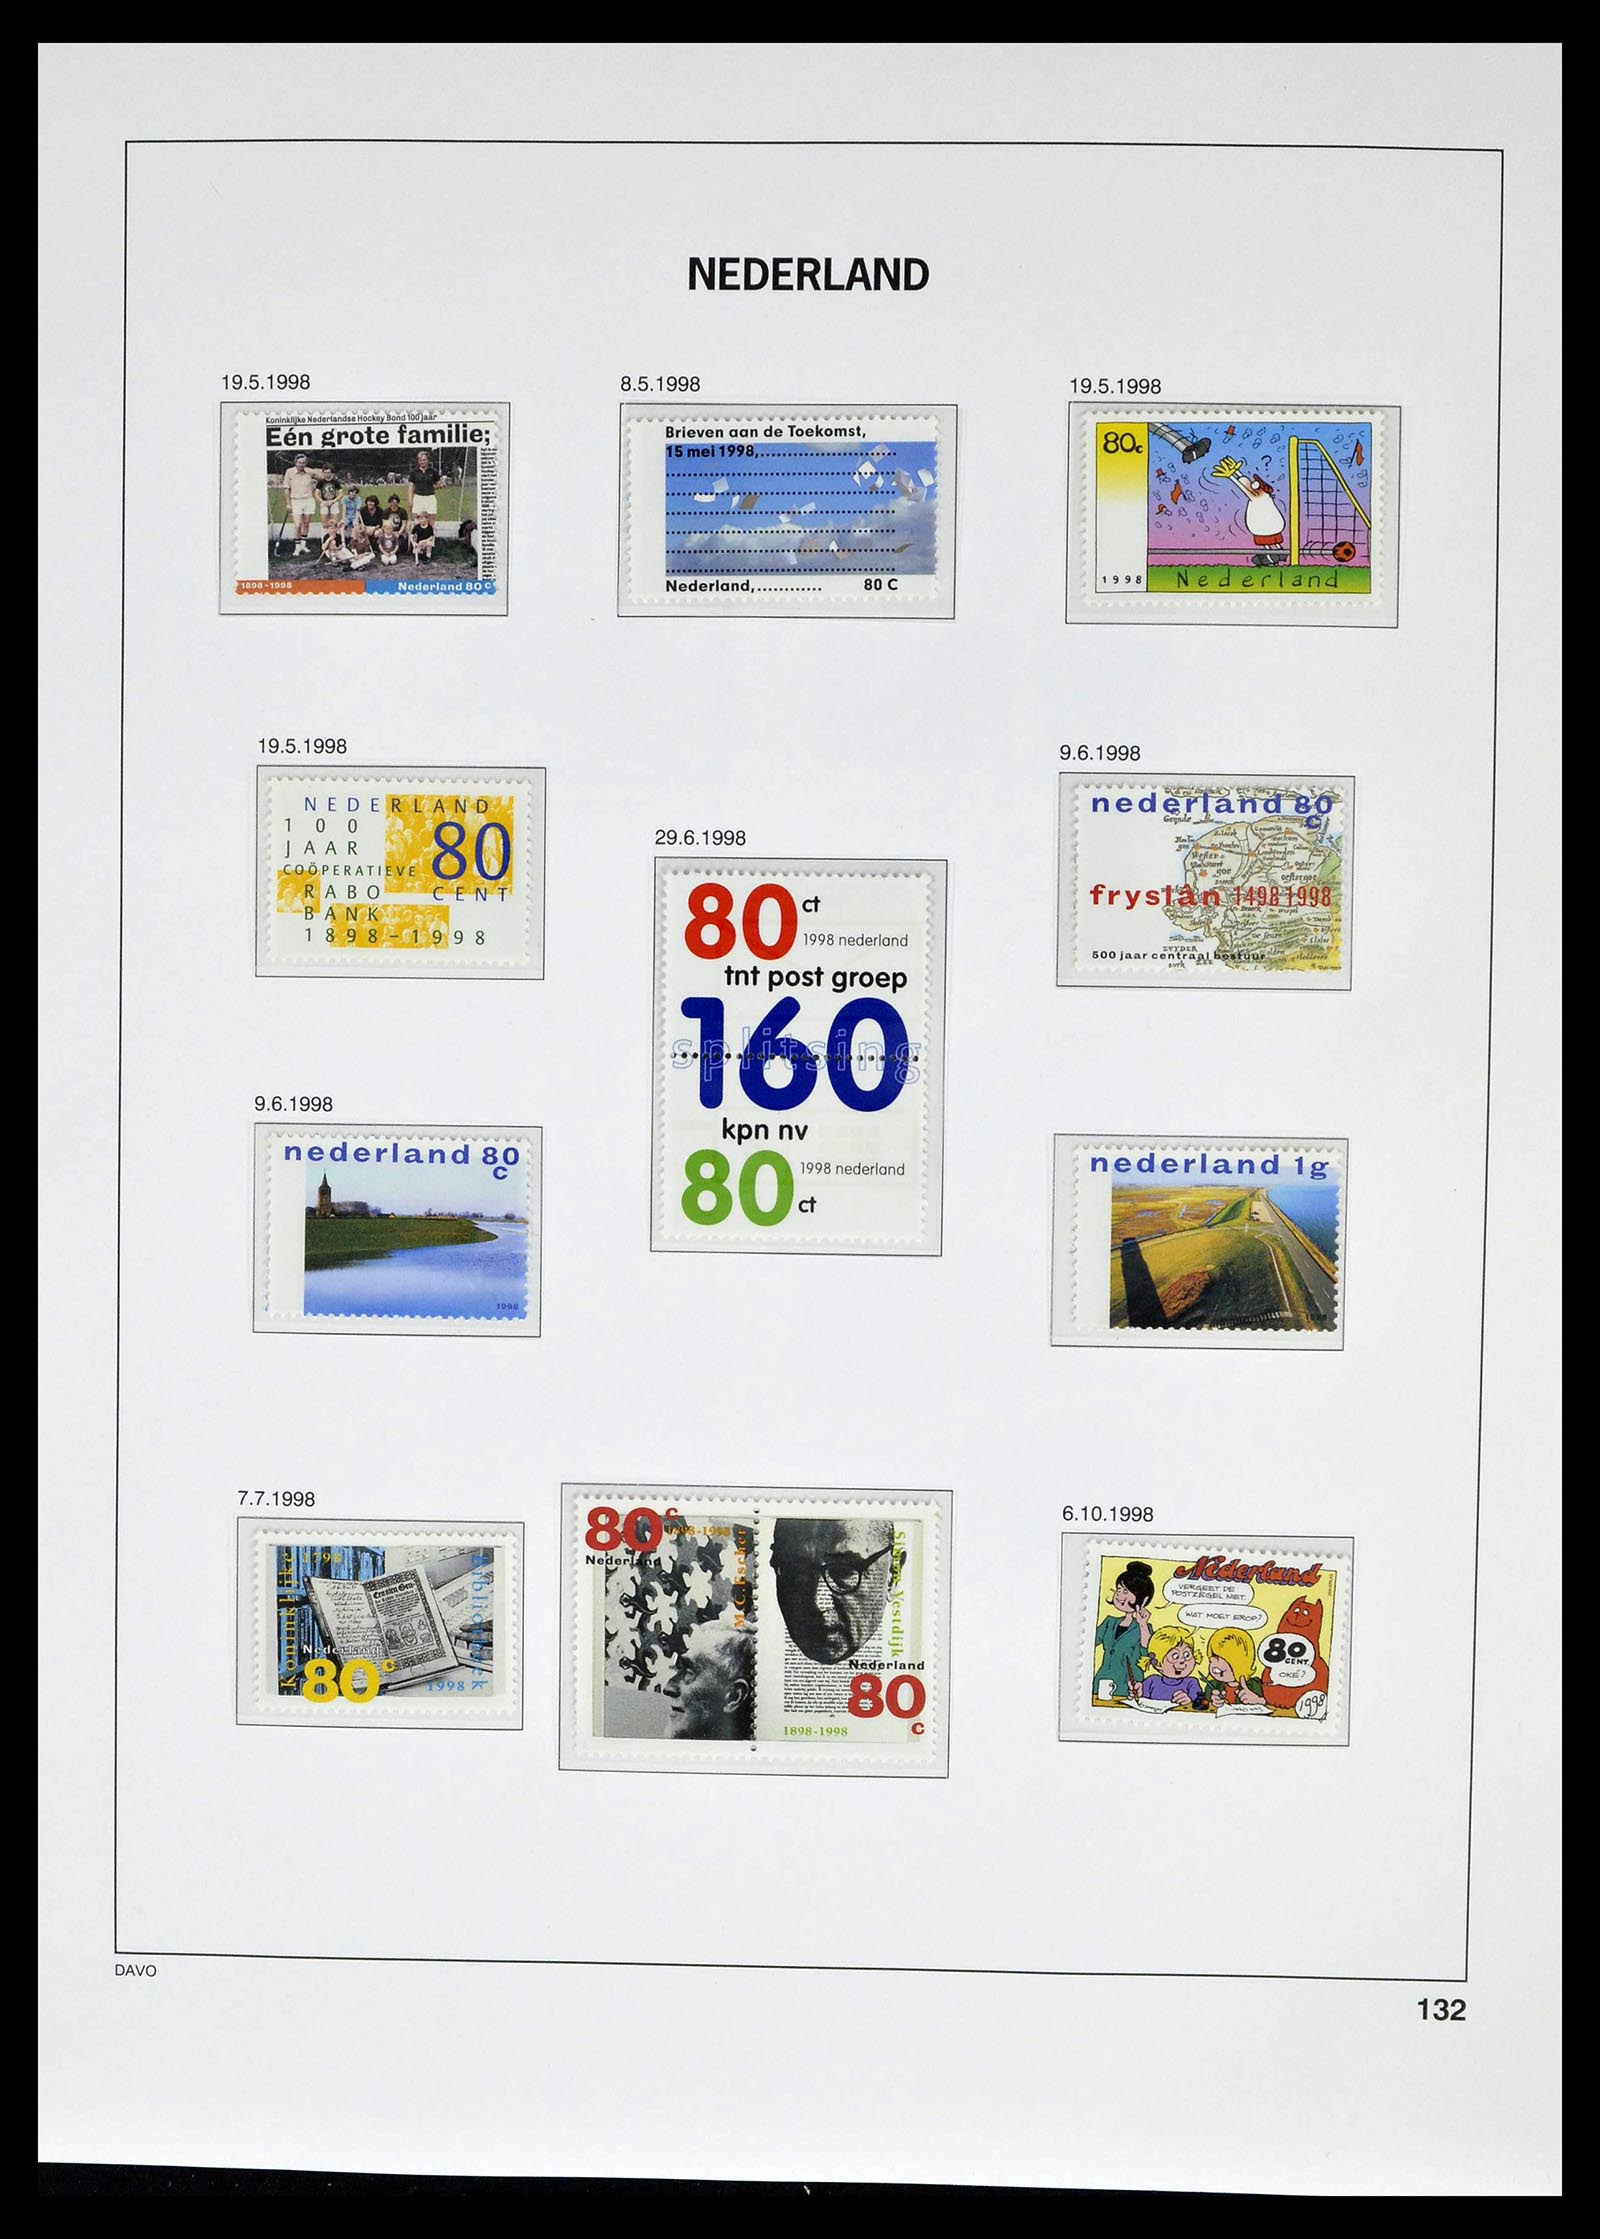 39136 0091 - Stamp collection 39136 Netherlands 1975-2020!